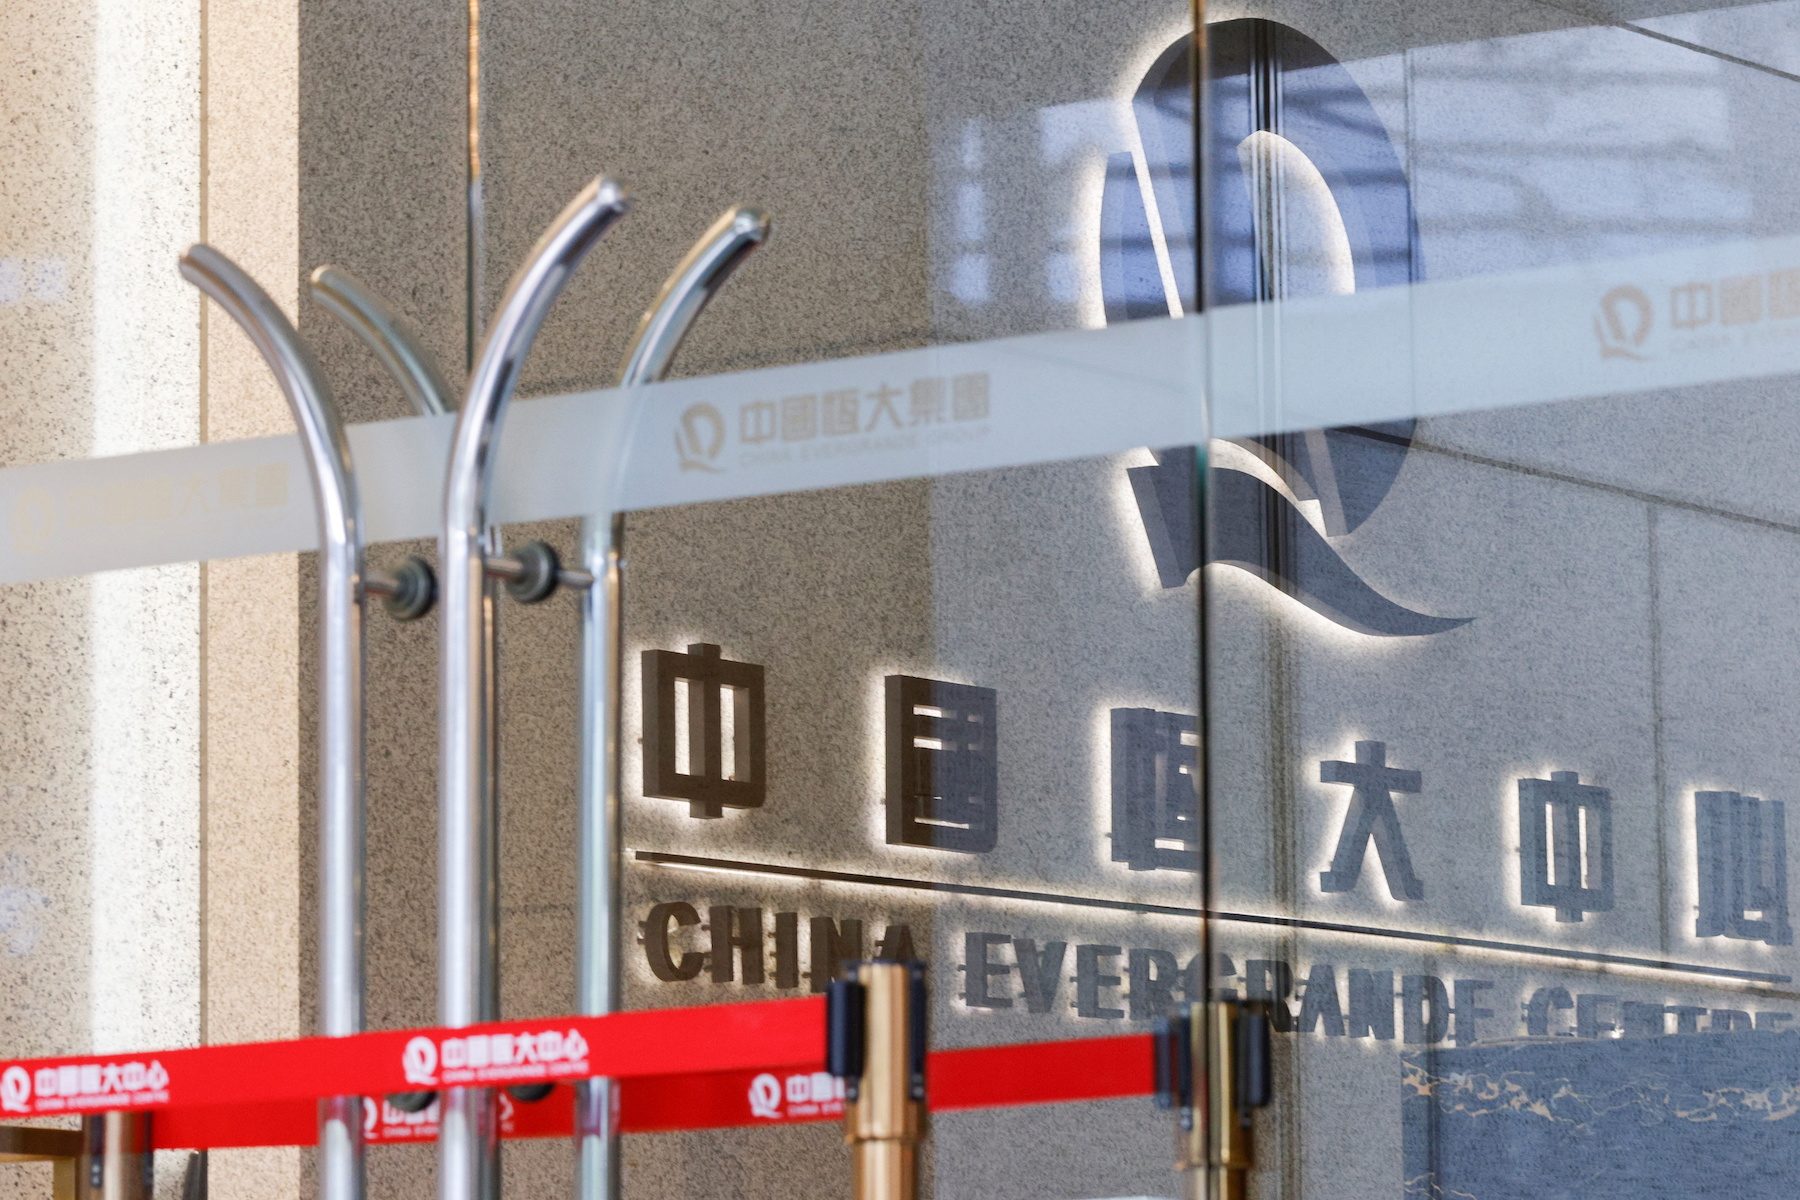 Evergrande, Kaisa cut by Fitch to default after missed payment deadlines